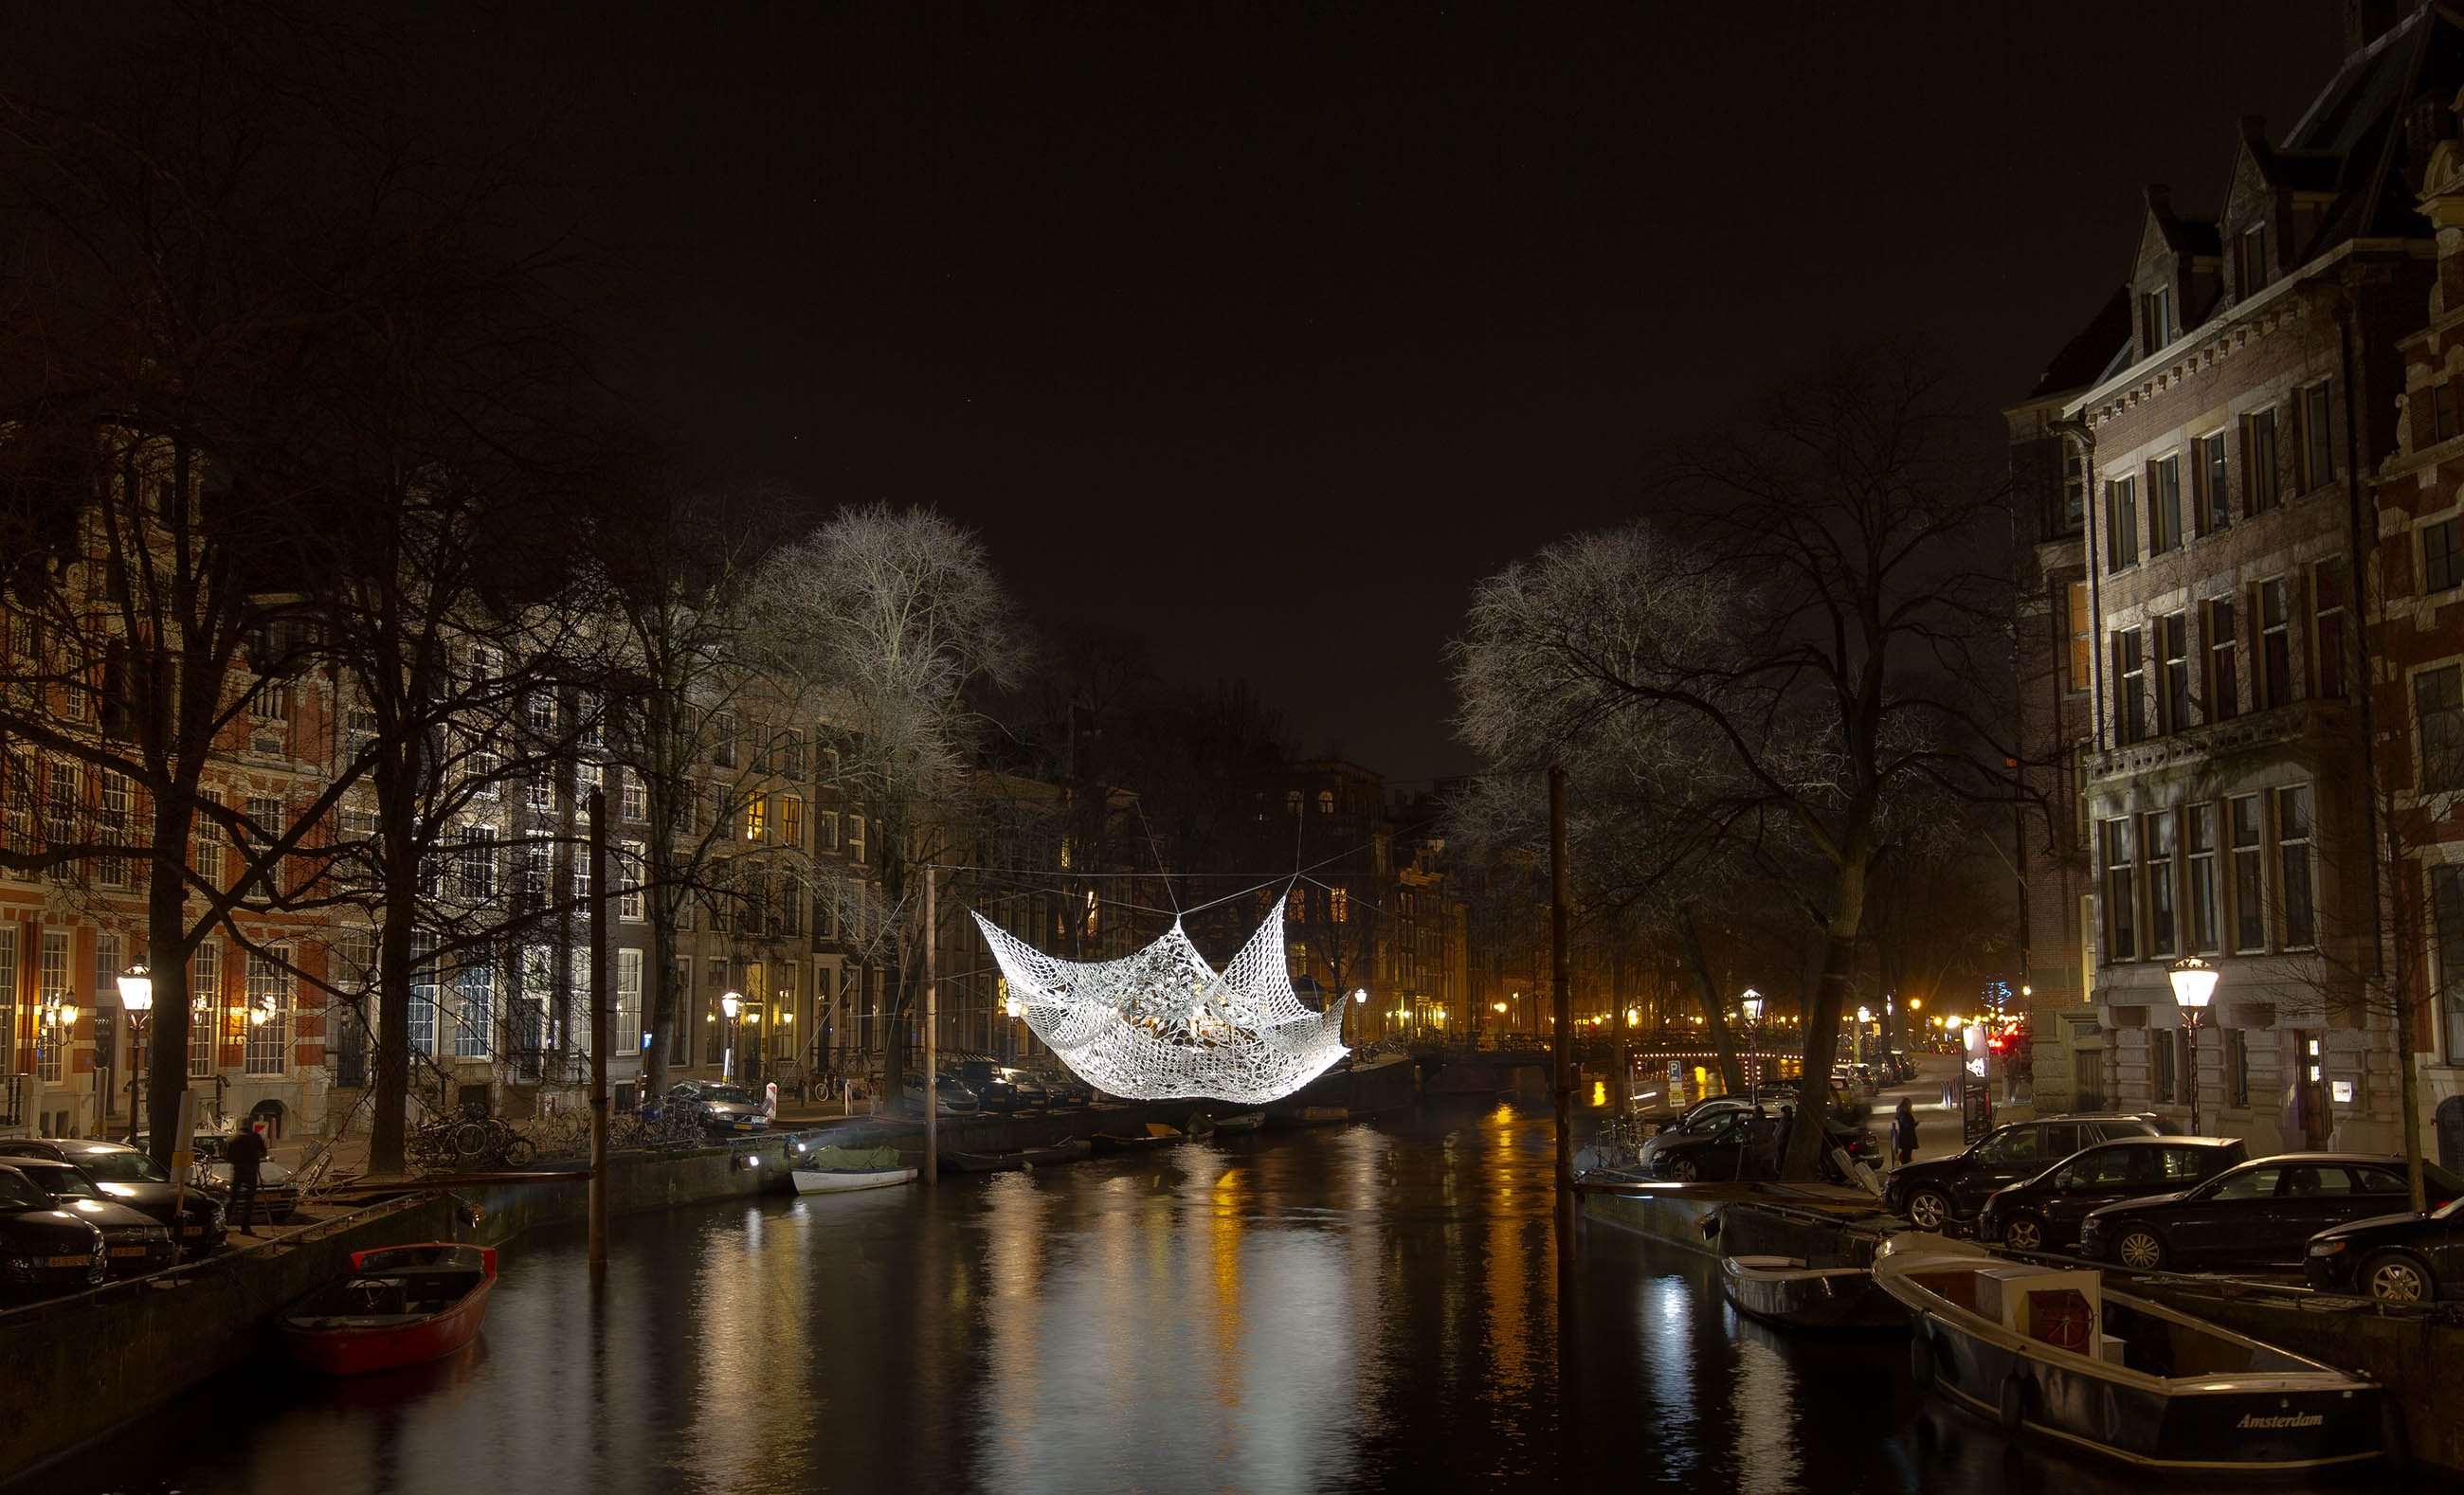 The-Lace-Choi-and-Shine-Architects-amsterdam-light-festival-city-europe-bike-houses-architecture